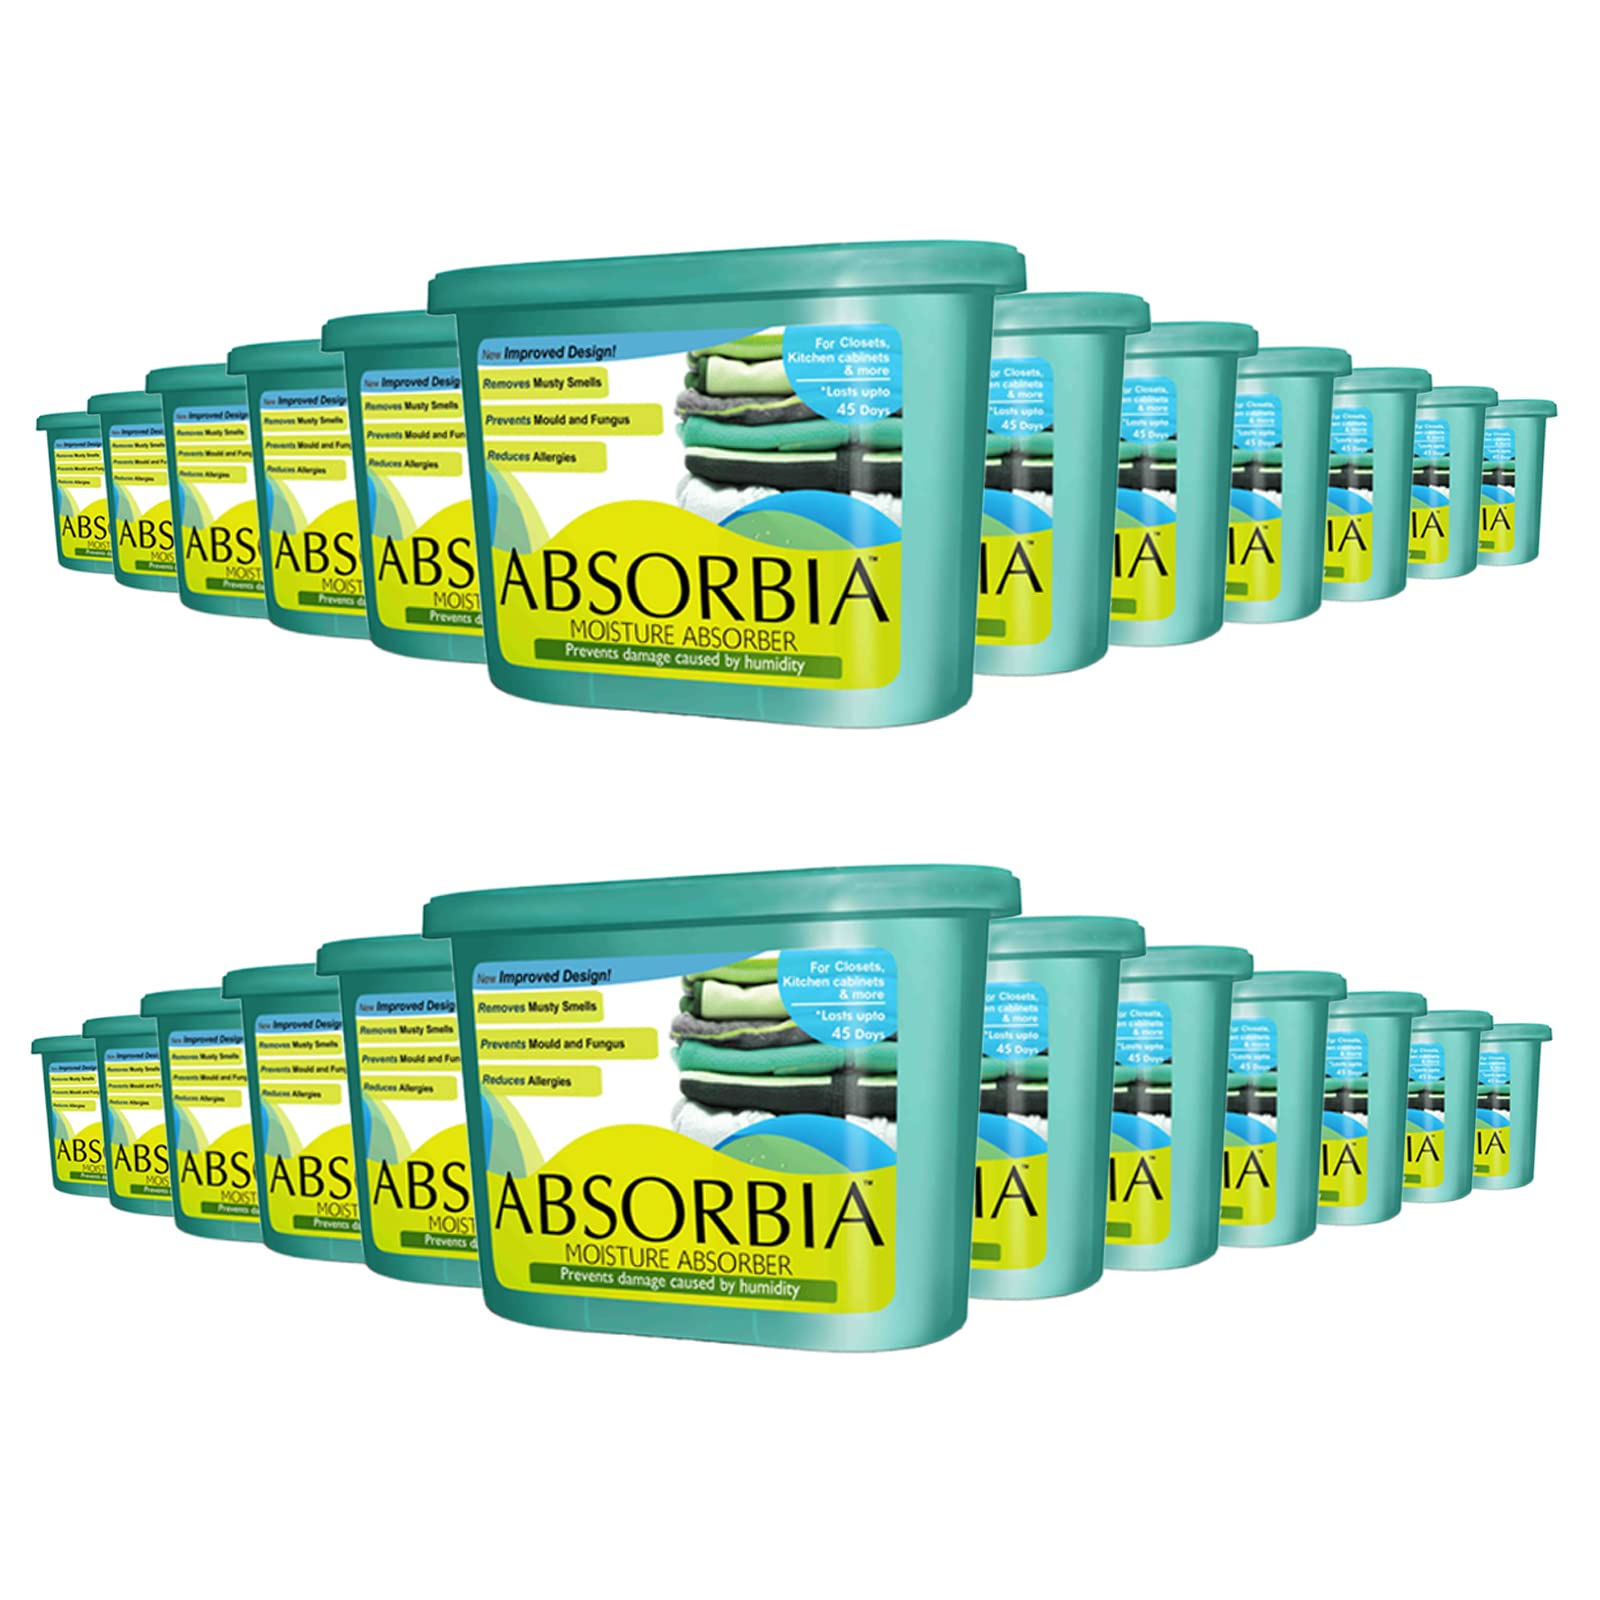 Absorbia classic Variant (300g x 96)